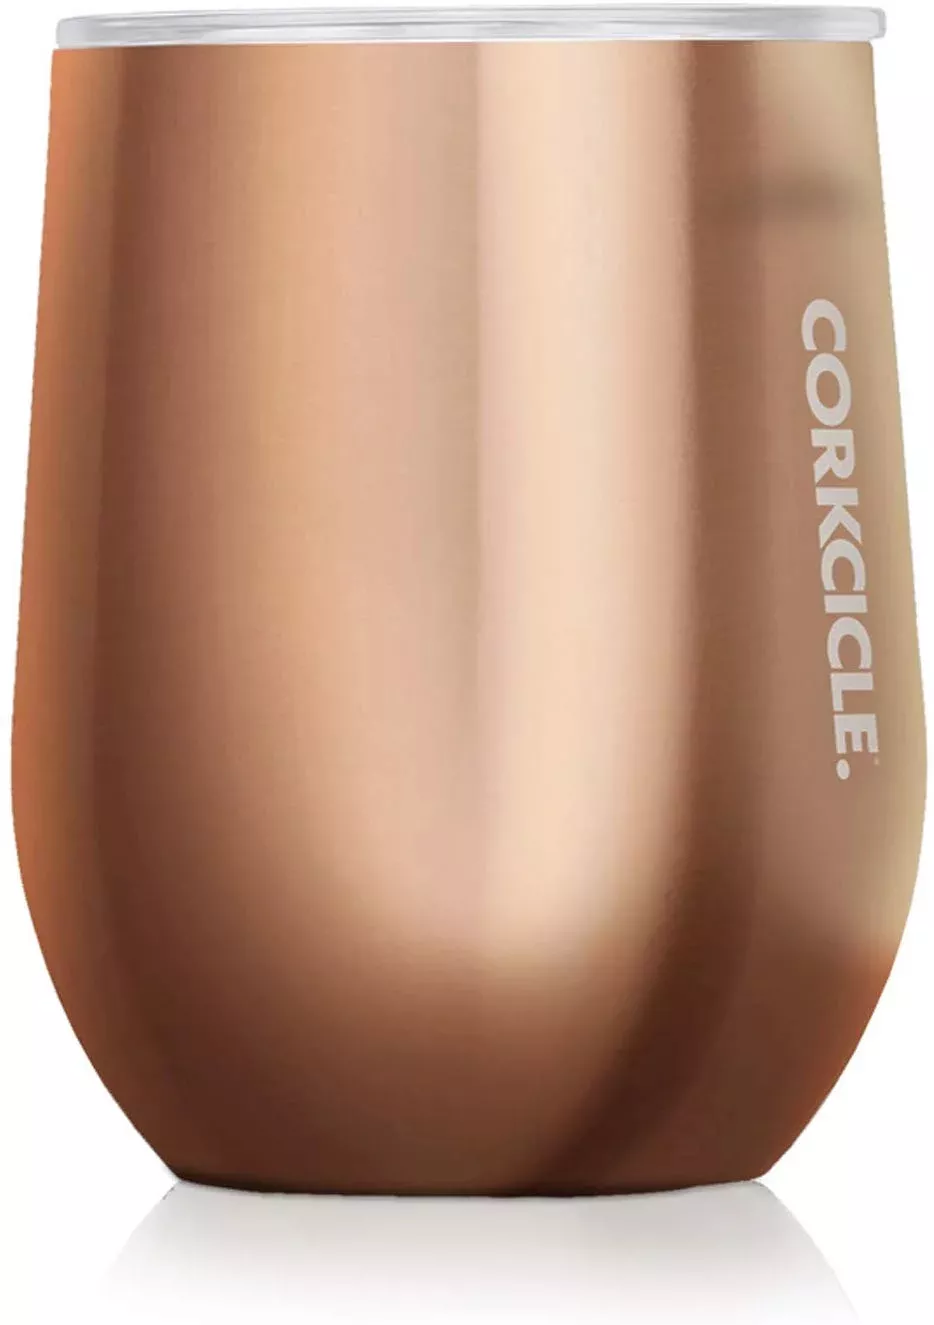 Best Gifts For Hairdressers 2023: Corkcicle Wine Glass 2023